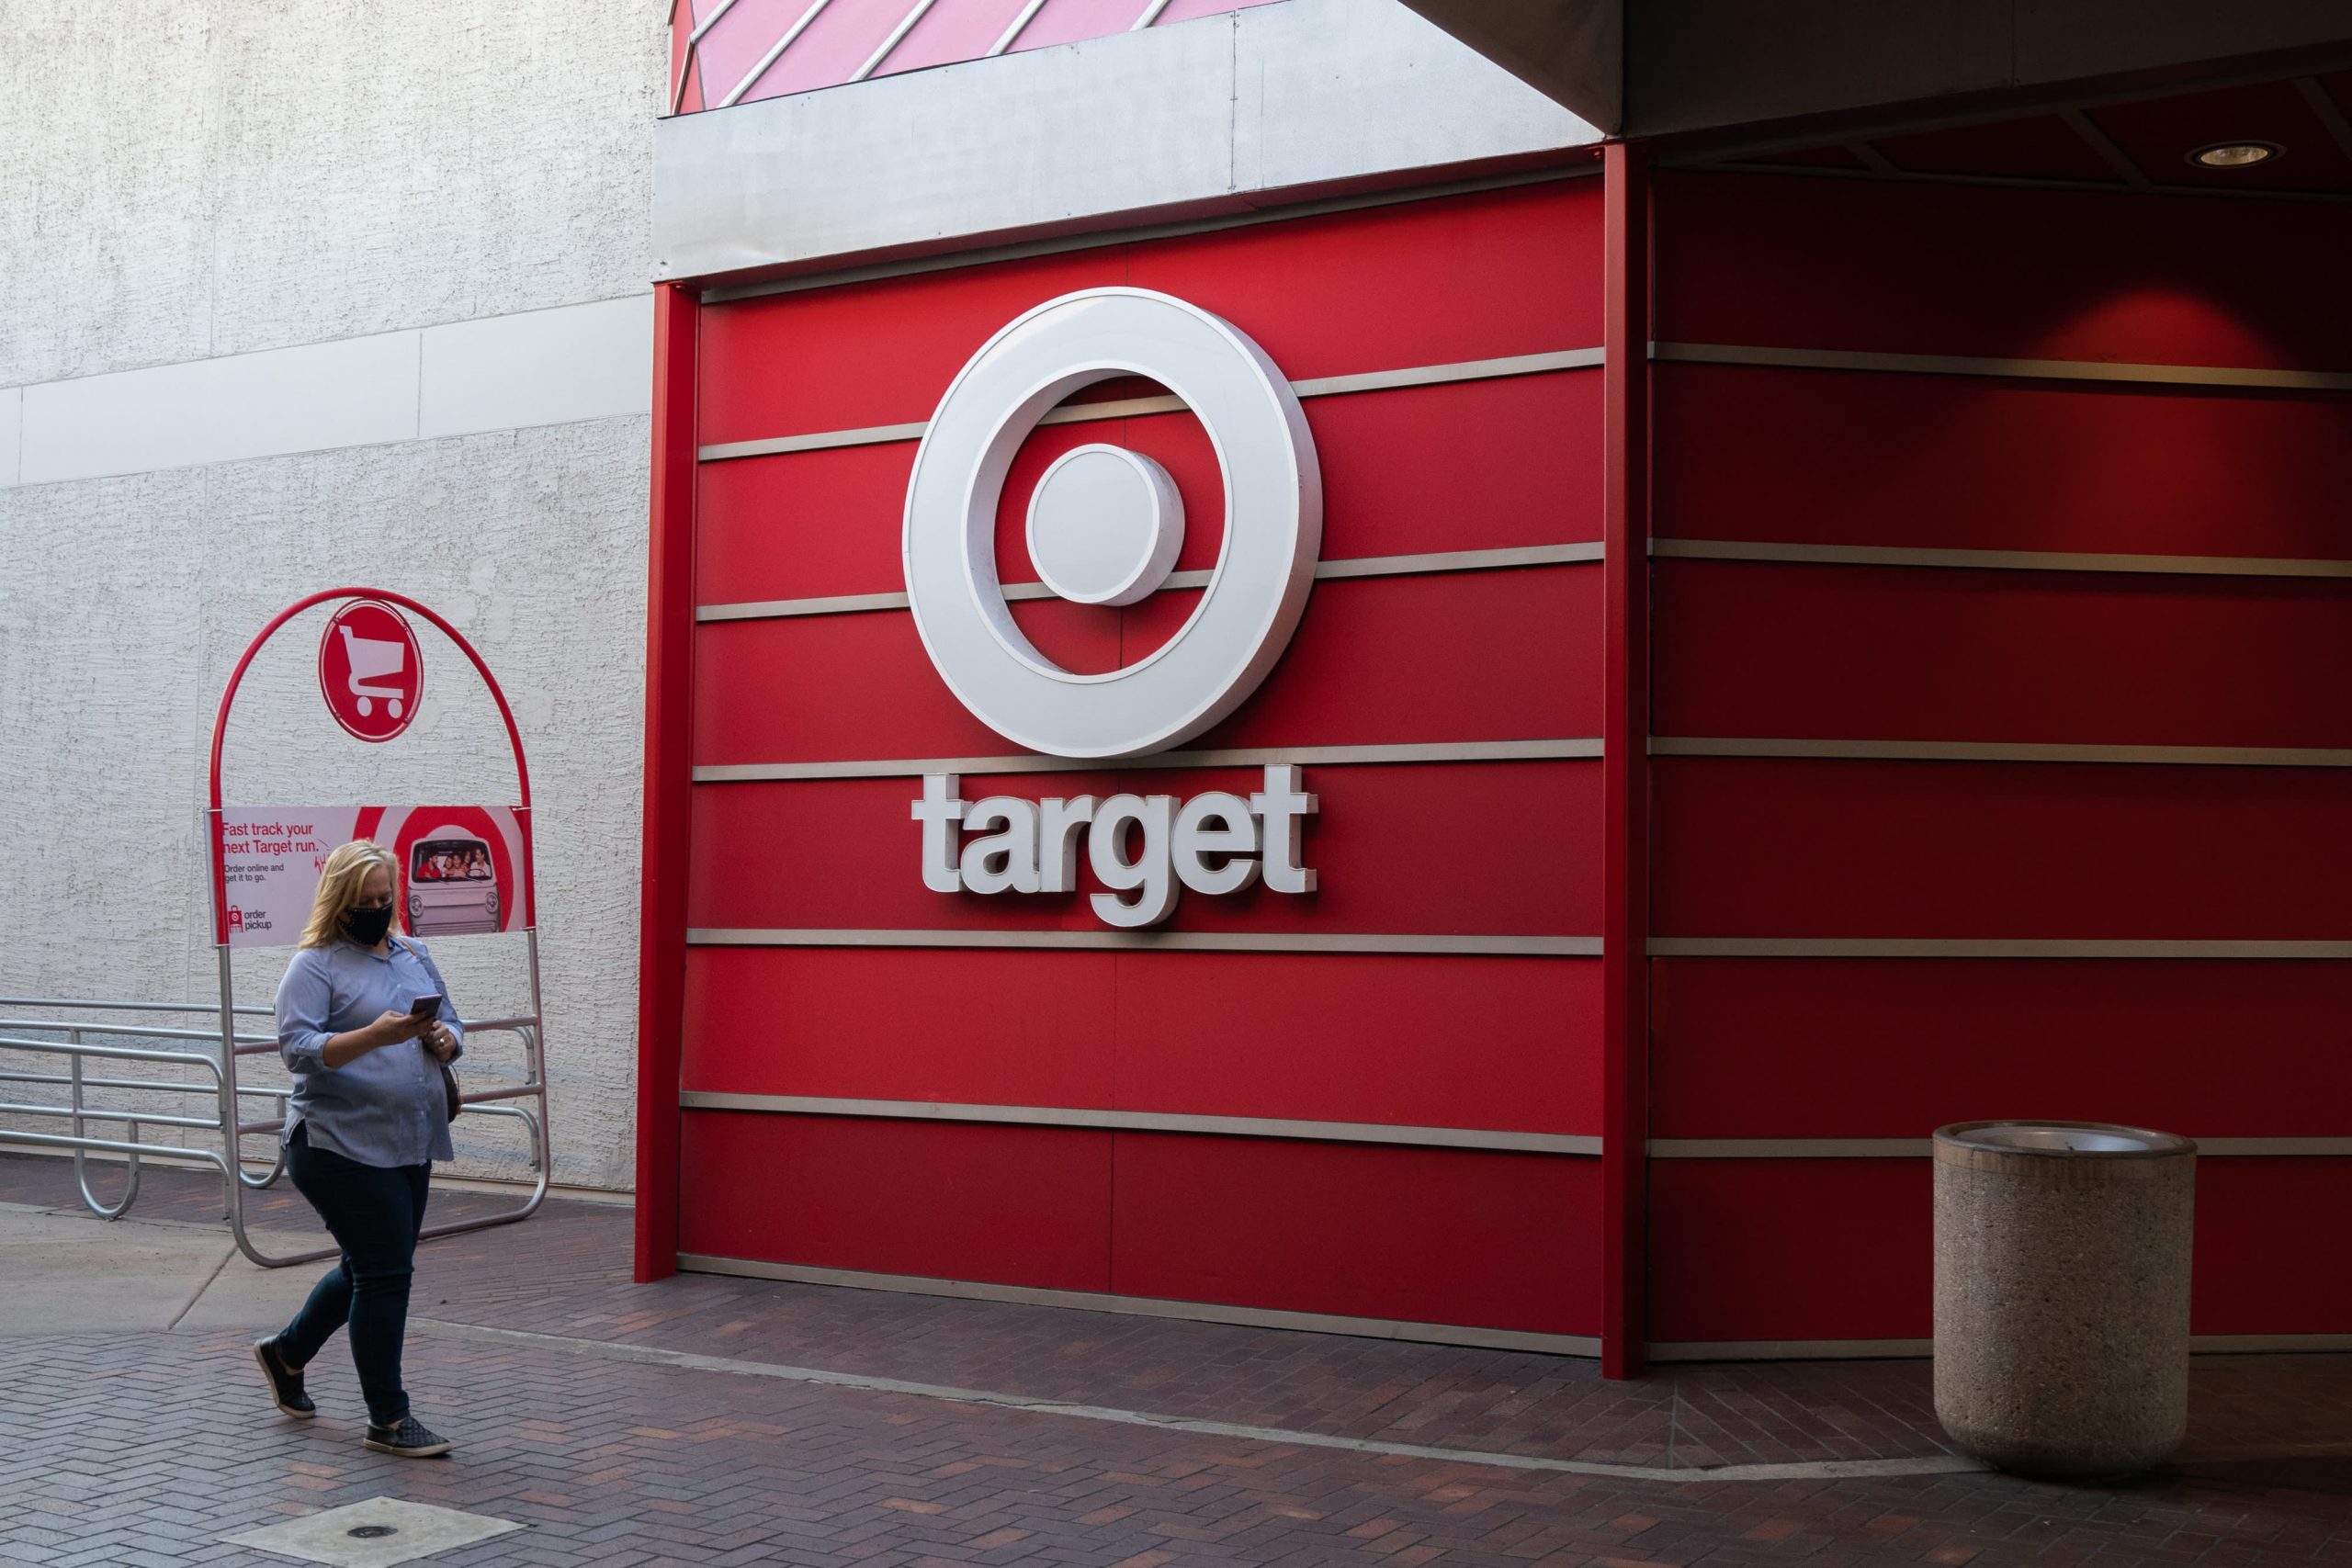 Target to invest $4 billion to speed along new stores and remodels, expand ability to fill online orders